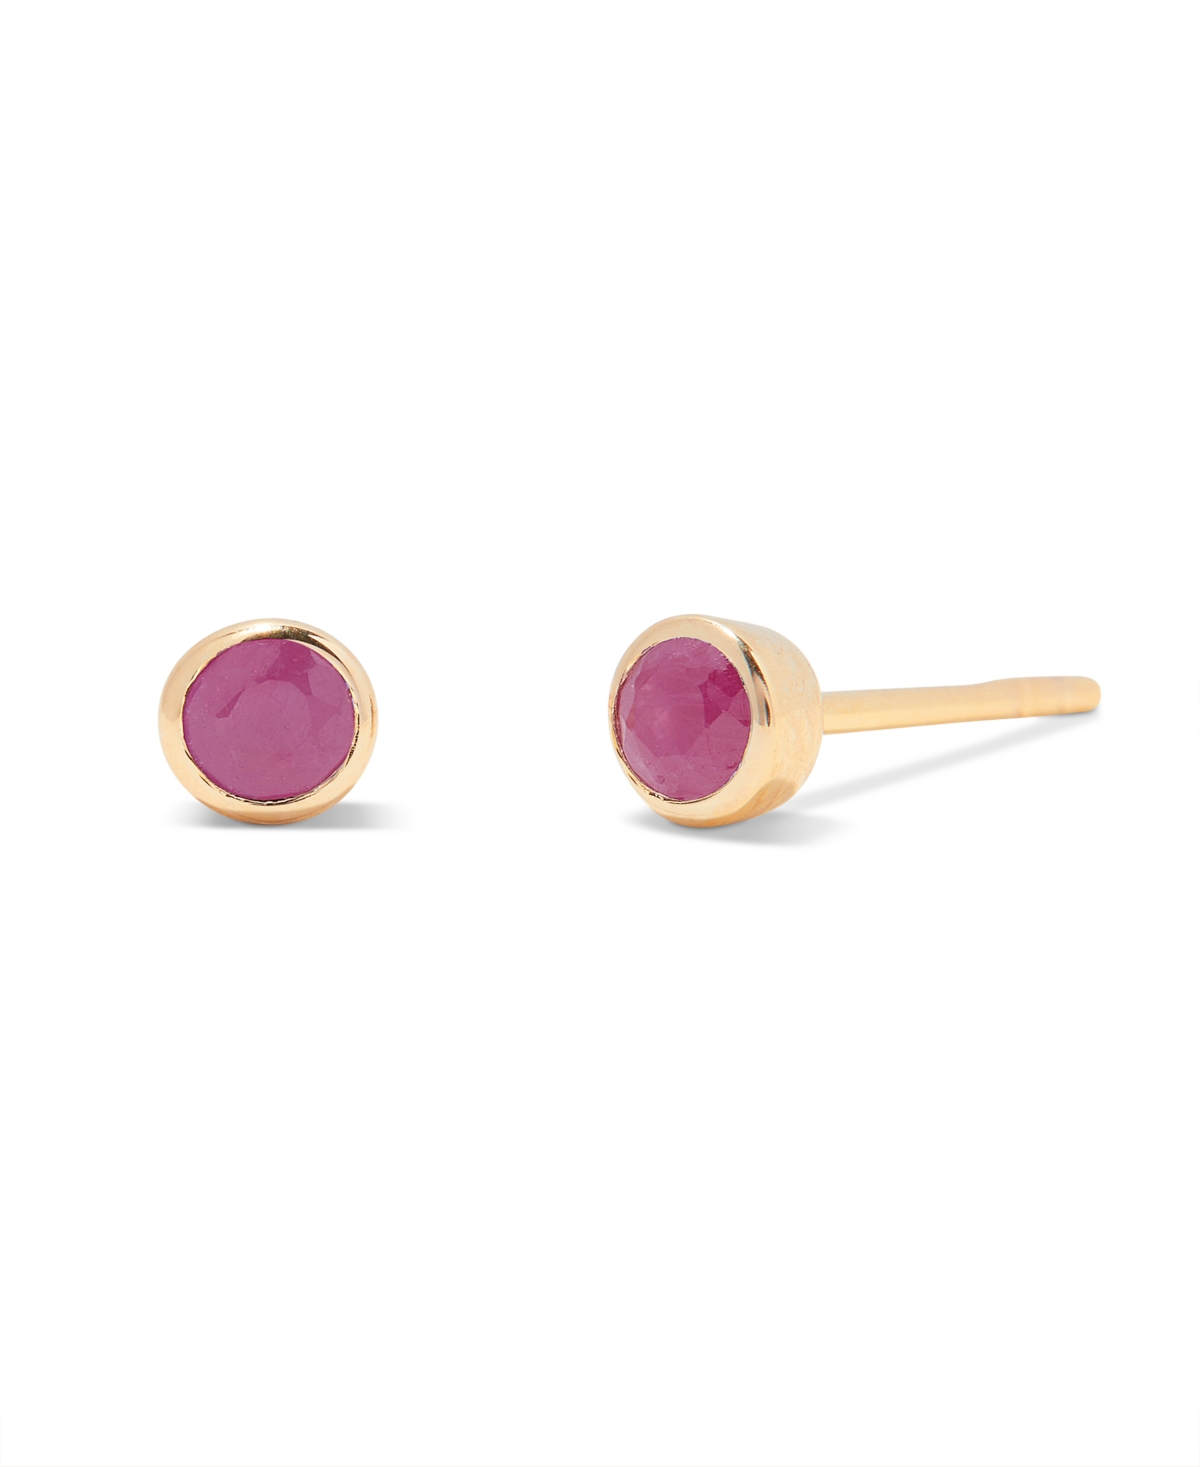 Brook & York Natural Stones 14k Gold-plated Vermeil Sage Birthstone Earrings In Gold- Oct